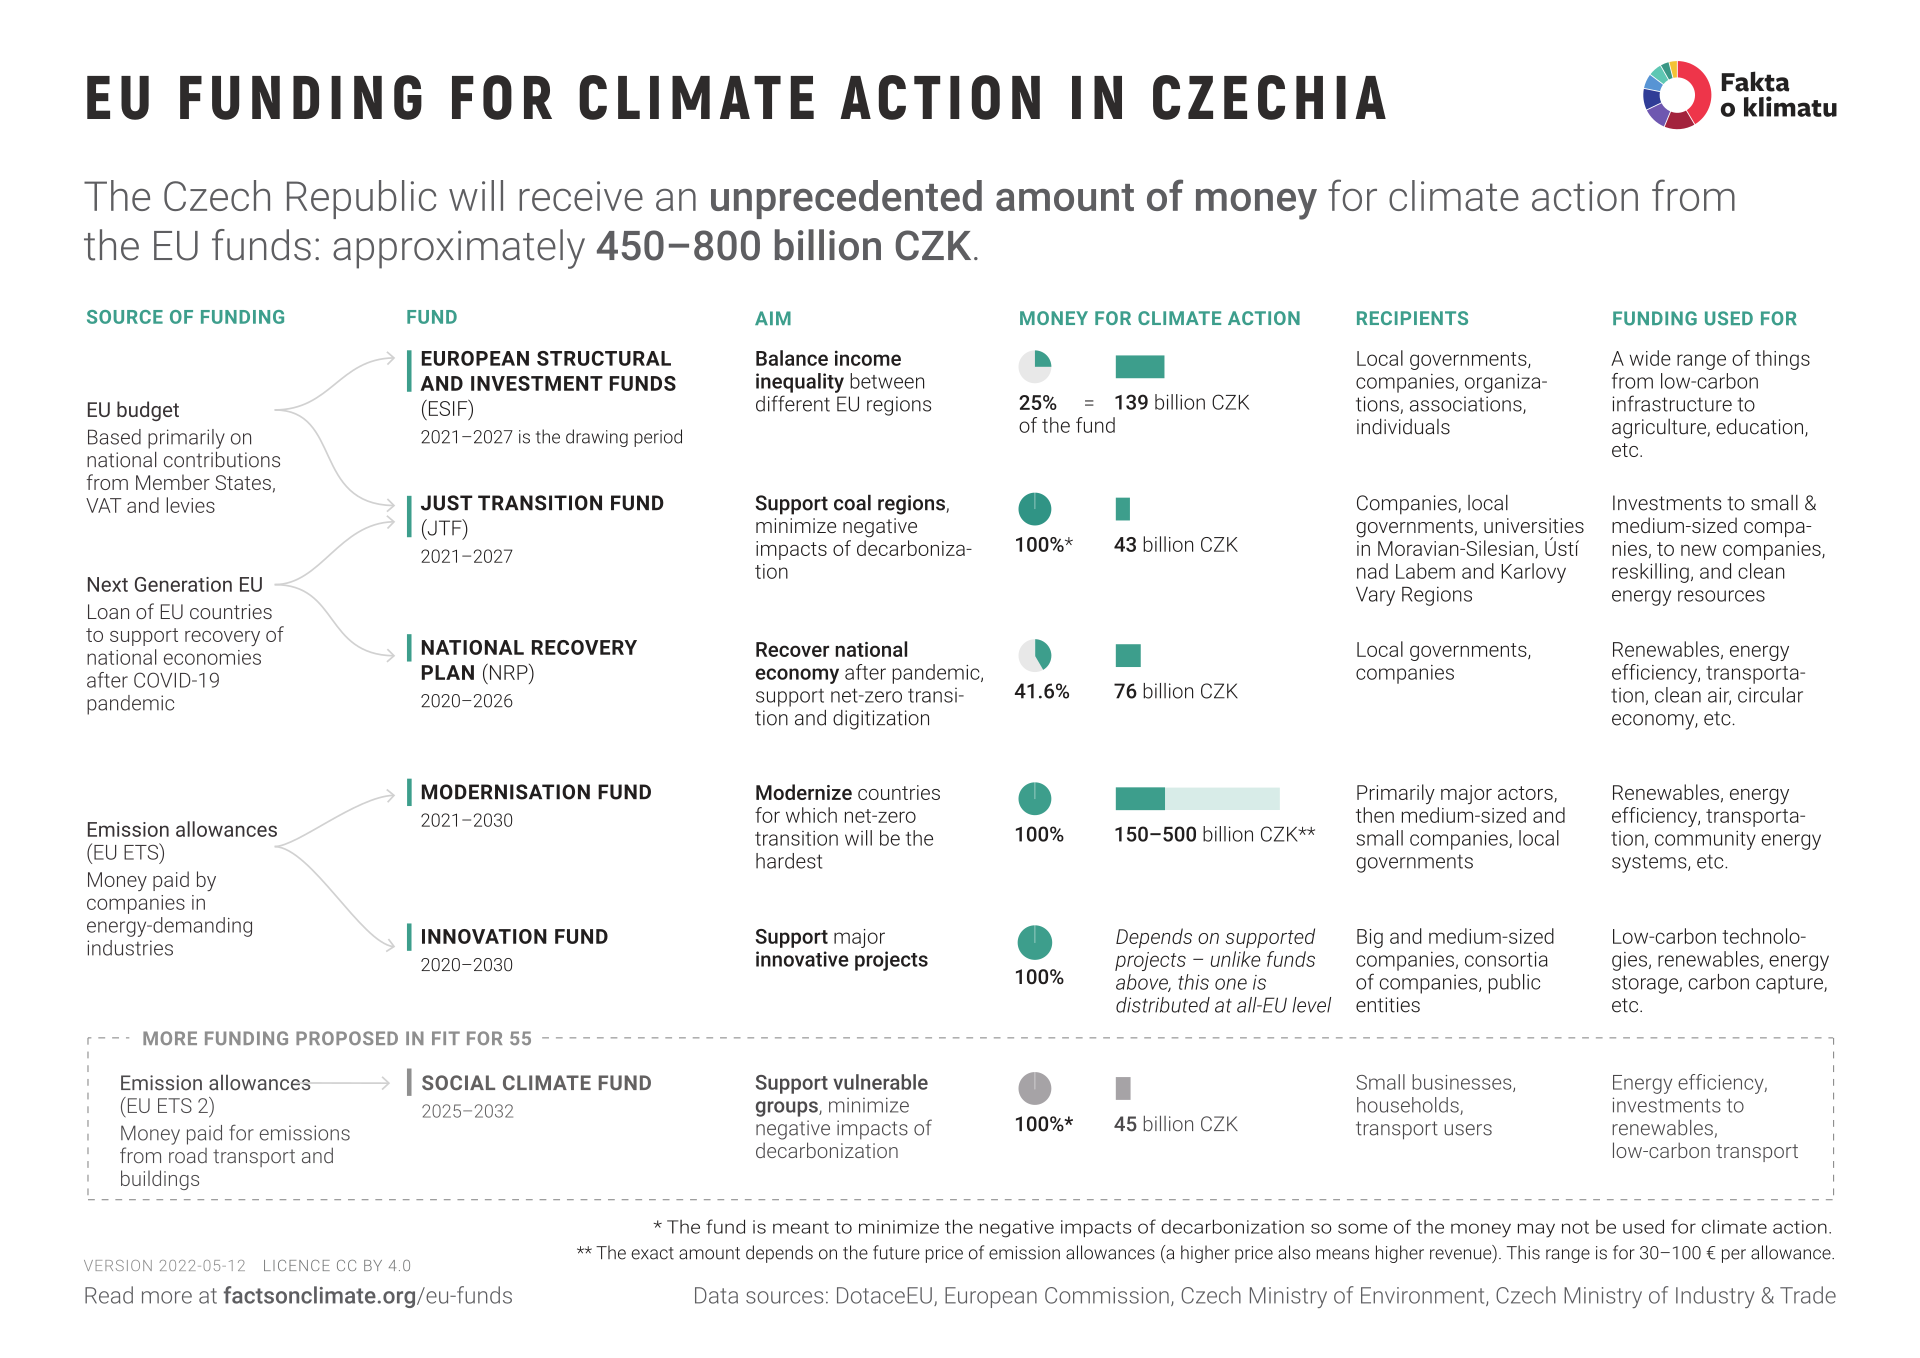 EU funding for climate action in Czechia